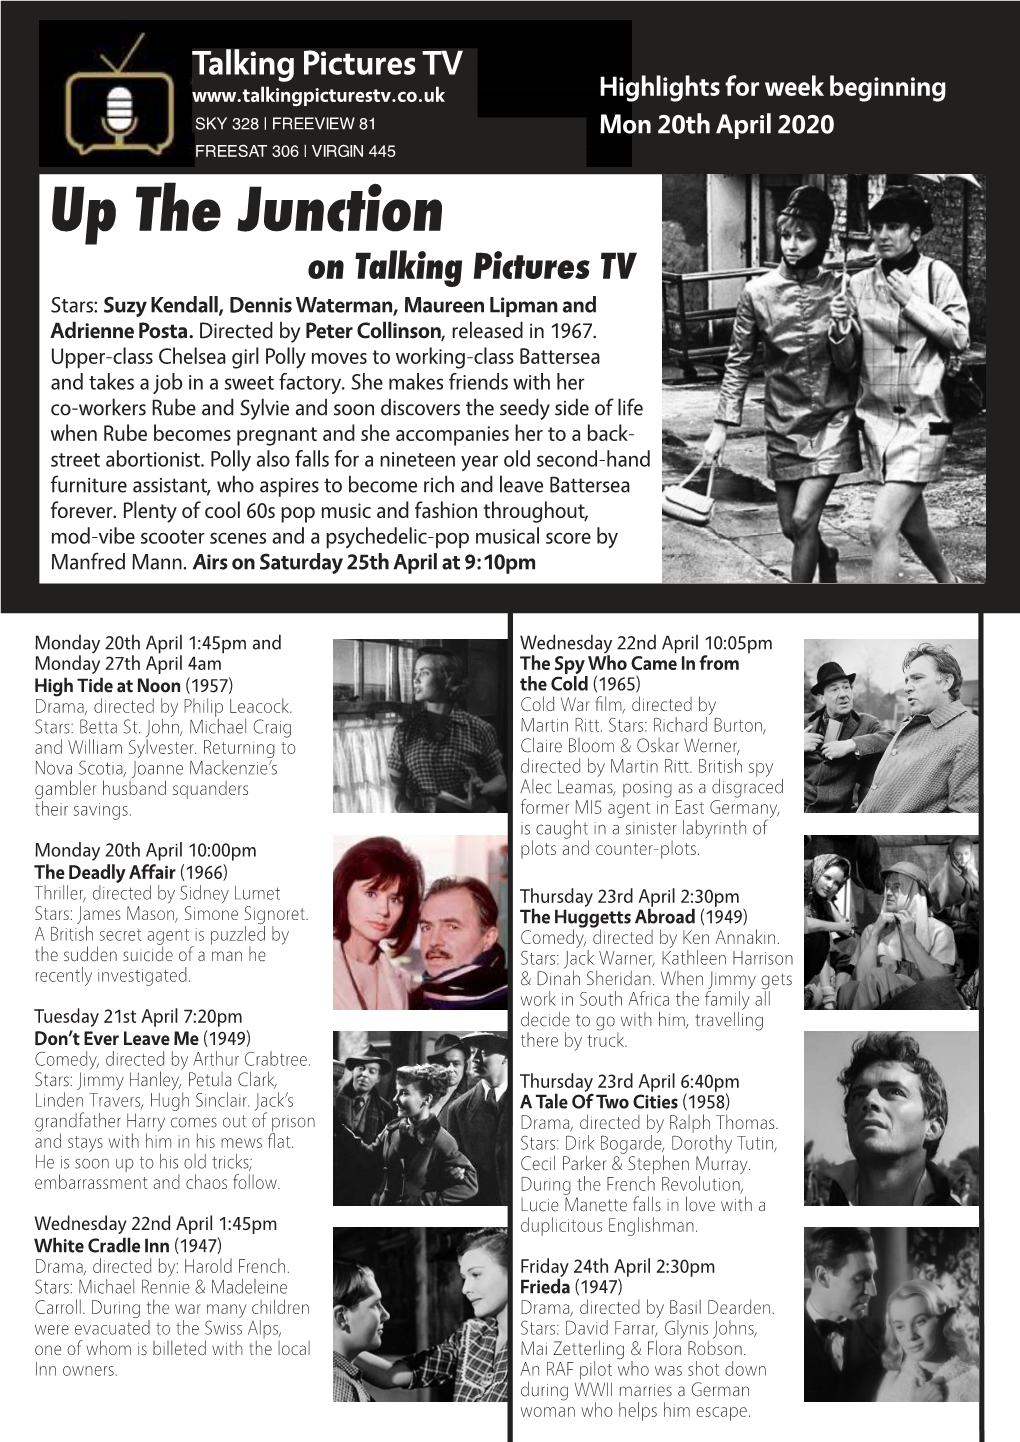 Up the Junction on Talking Pictures TV Stars: Suzy Kendall, Dennis Waterman, Maureen Lipman and Adrienne Posta